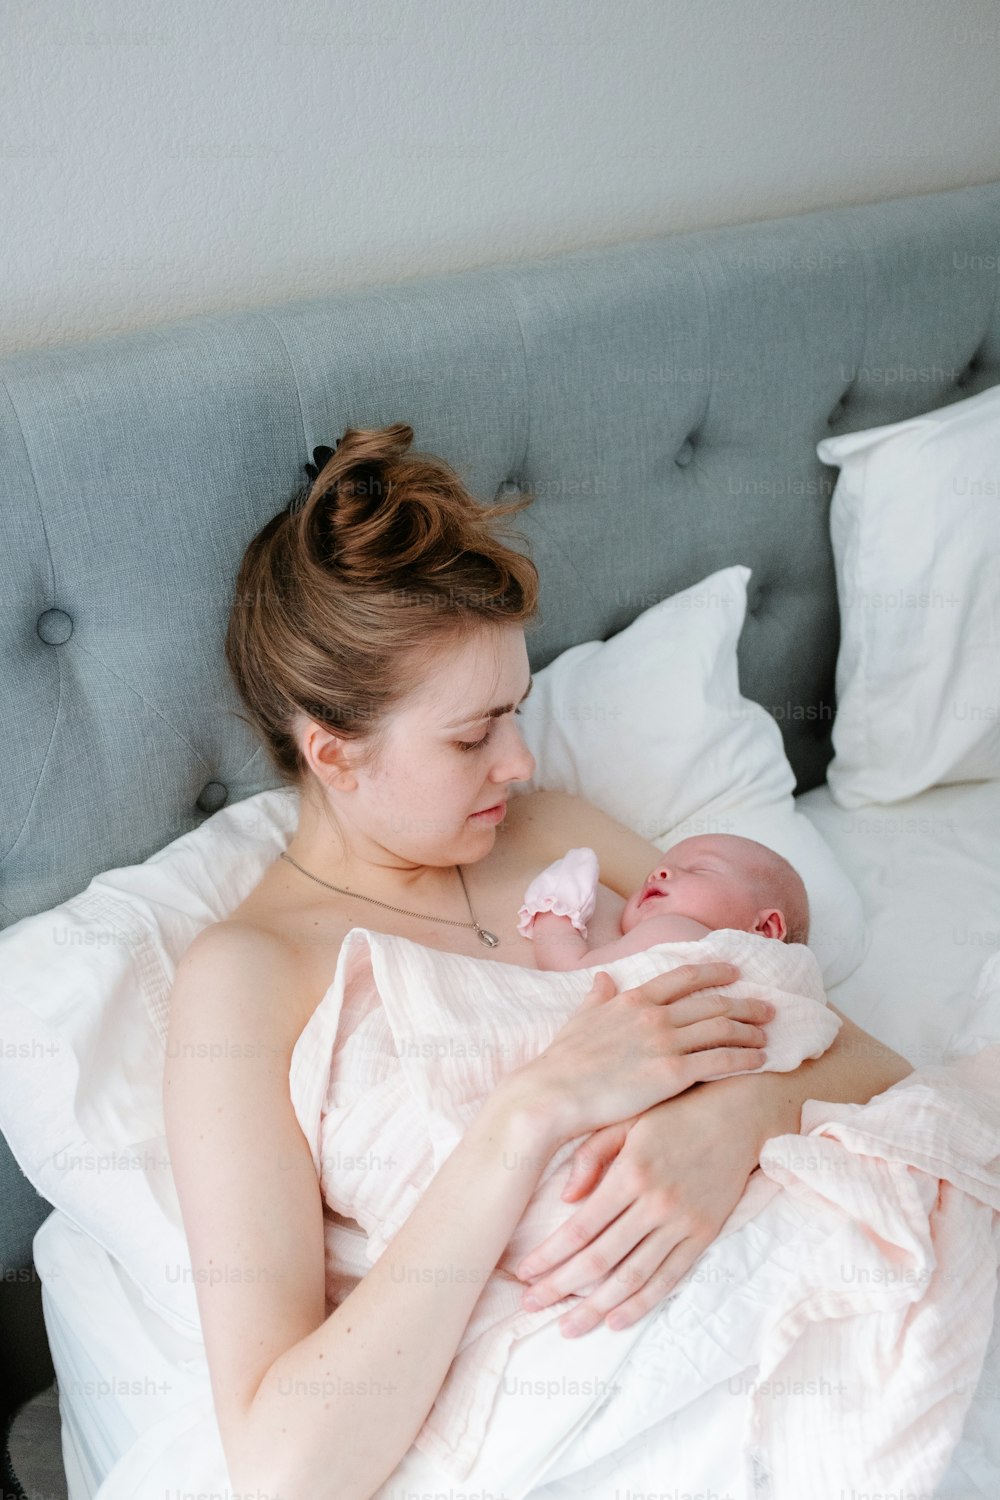 a woman holding a baby in her arms on a bed